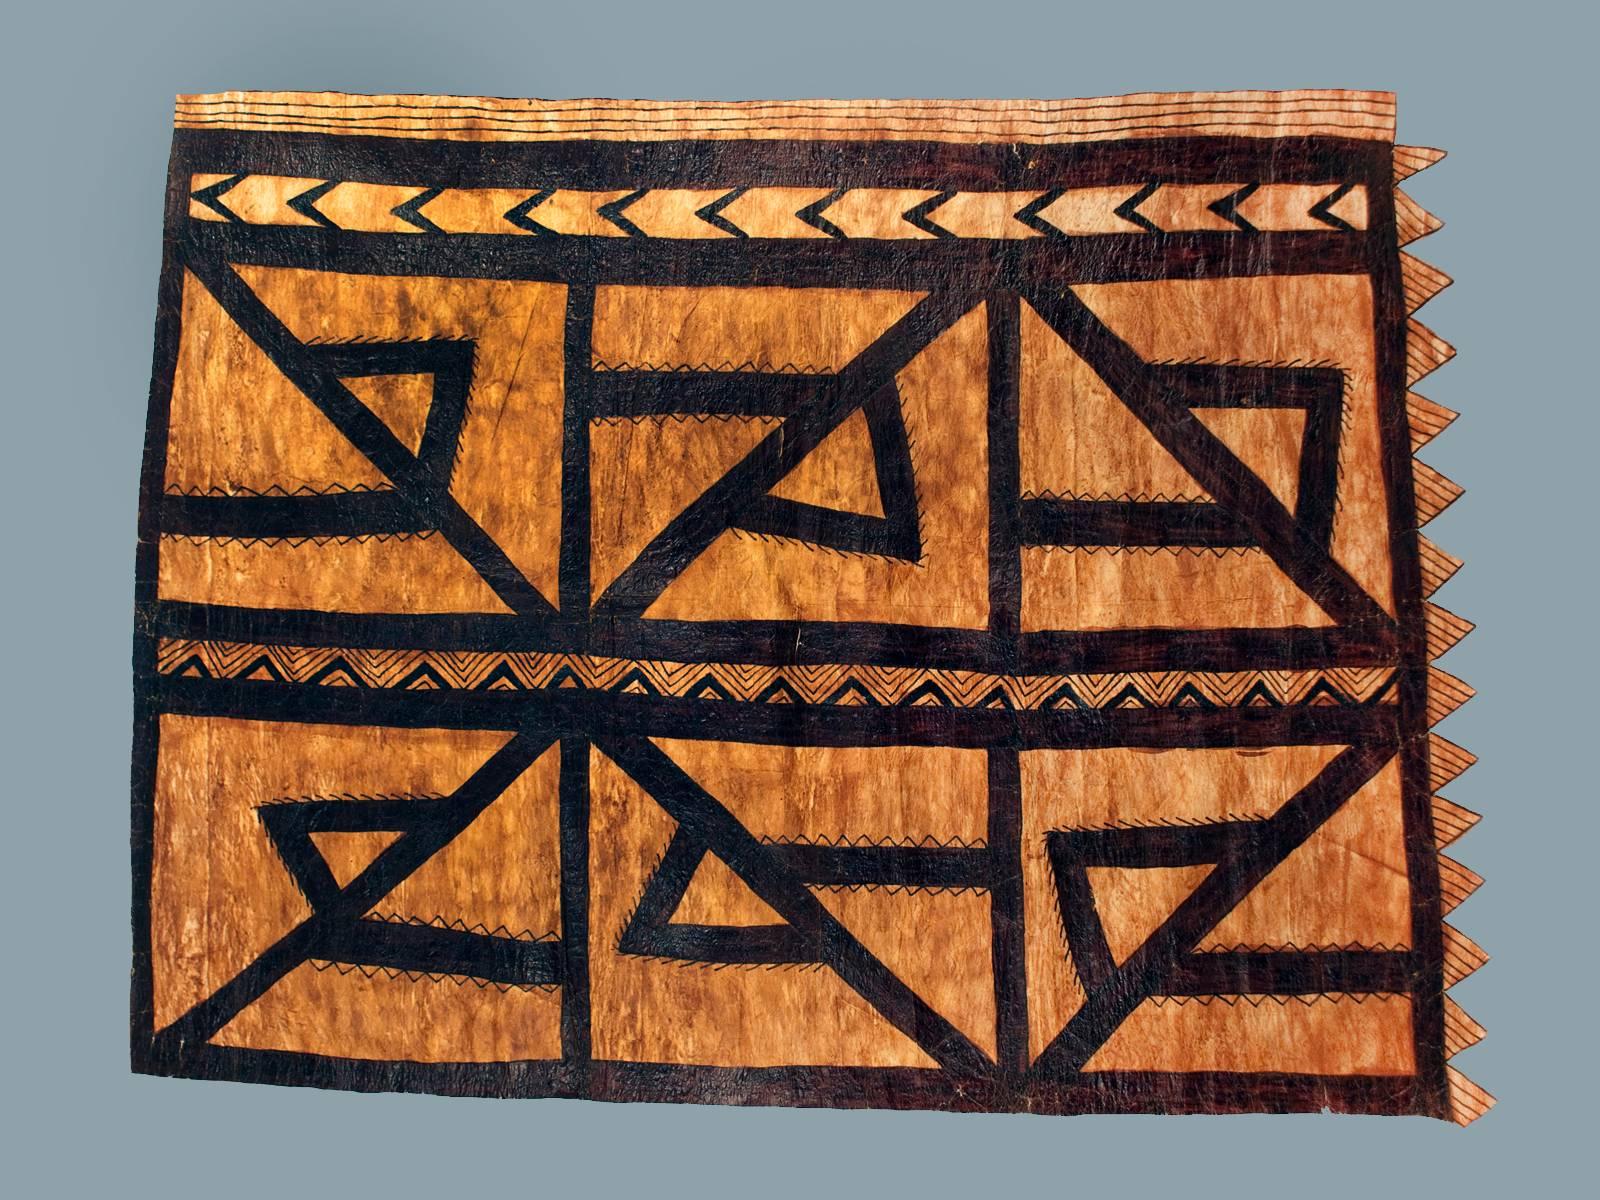 Offered by Zena Kruzick.
Early 20th century abstract tapa cloth fragment from Western Samoa.
Hand beaten bark cloth, natural pigment.
Measures: 39